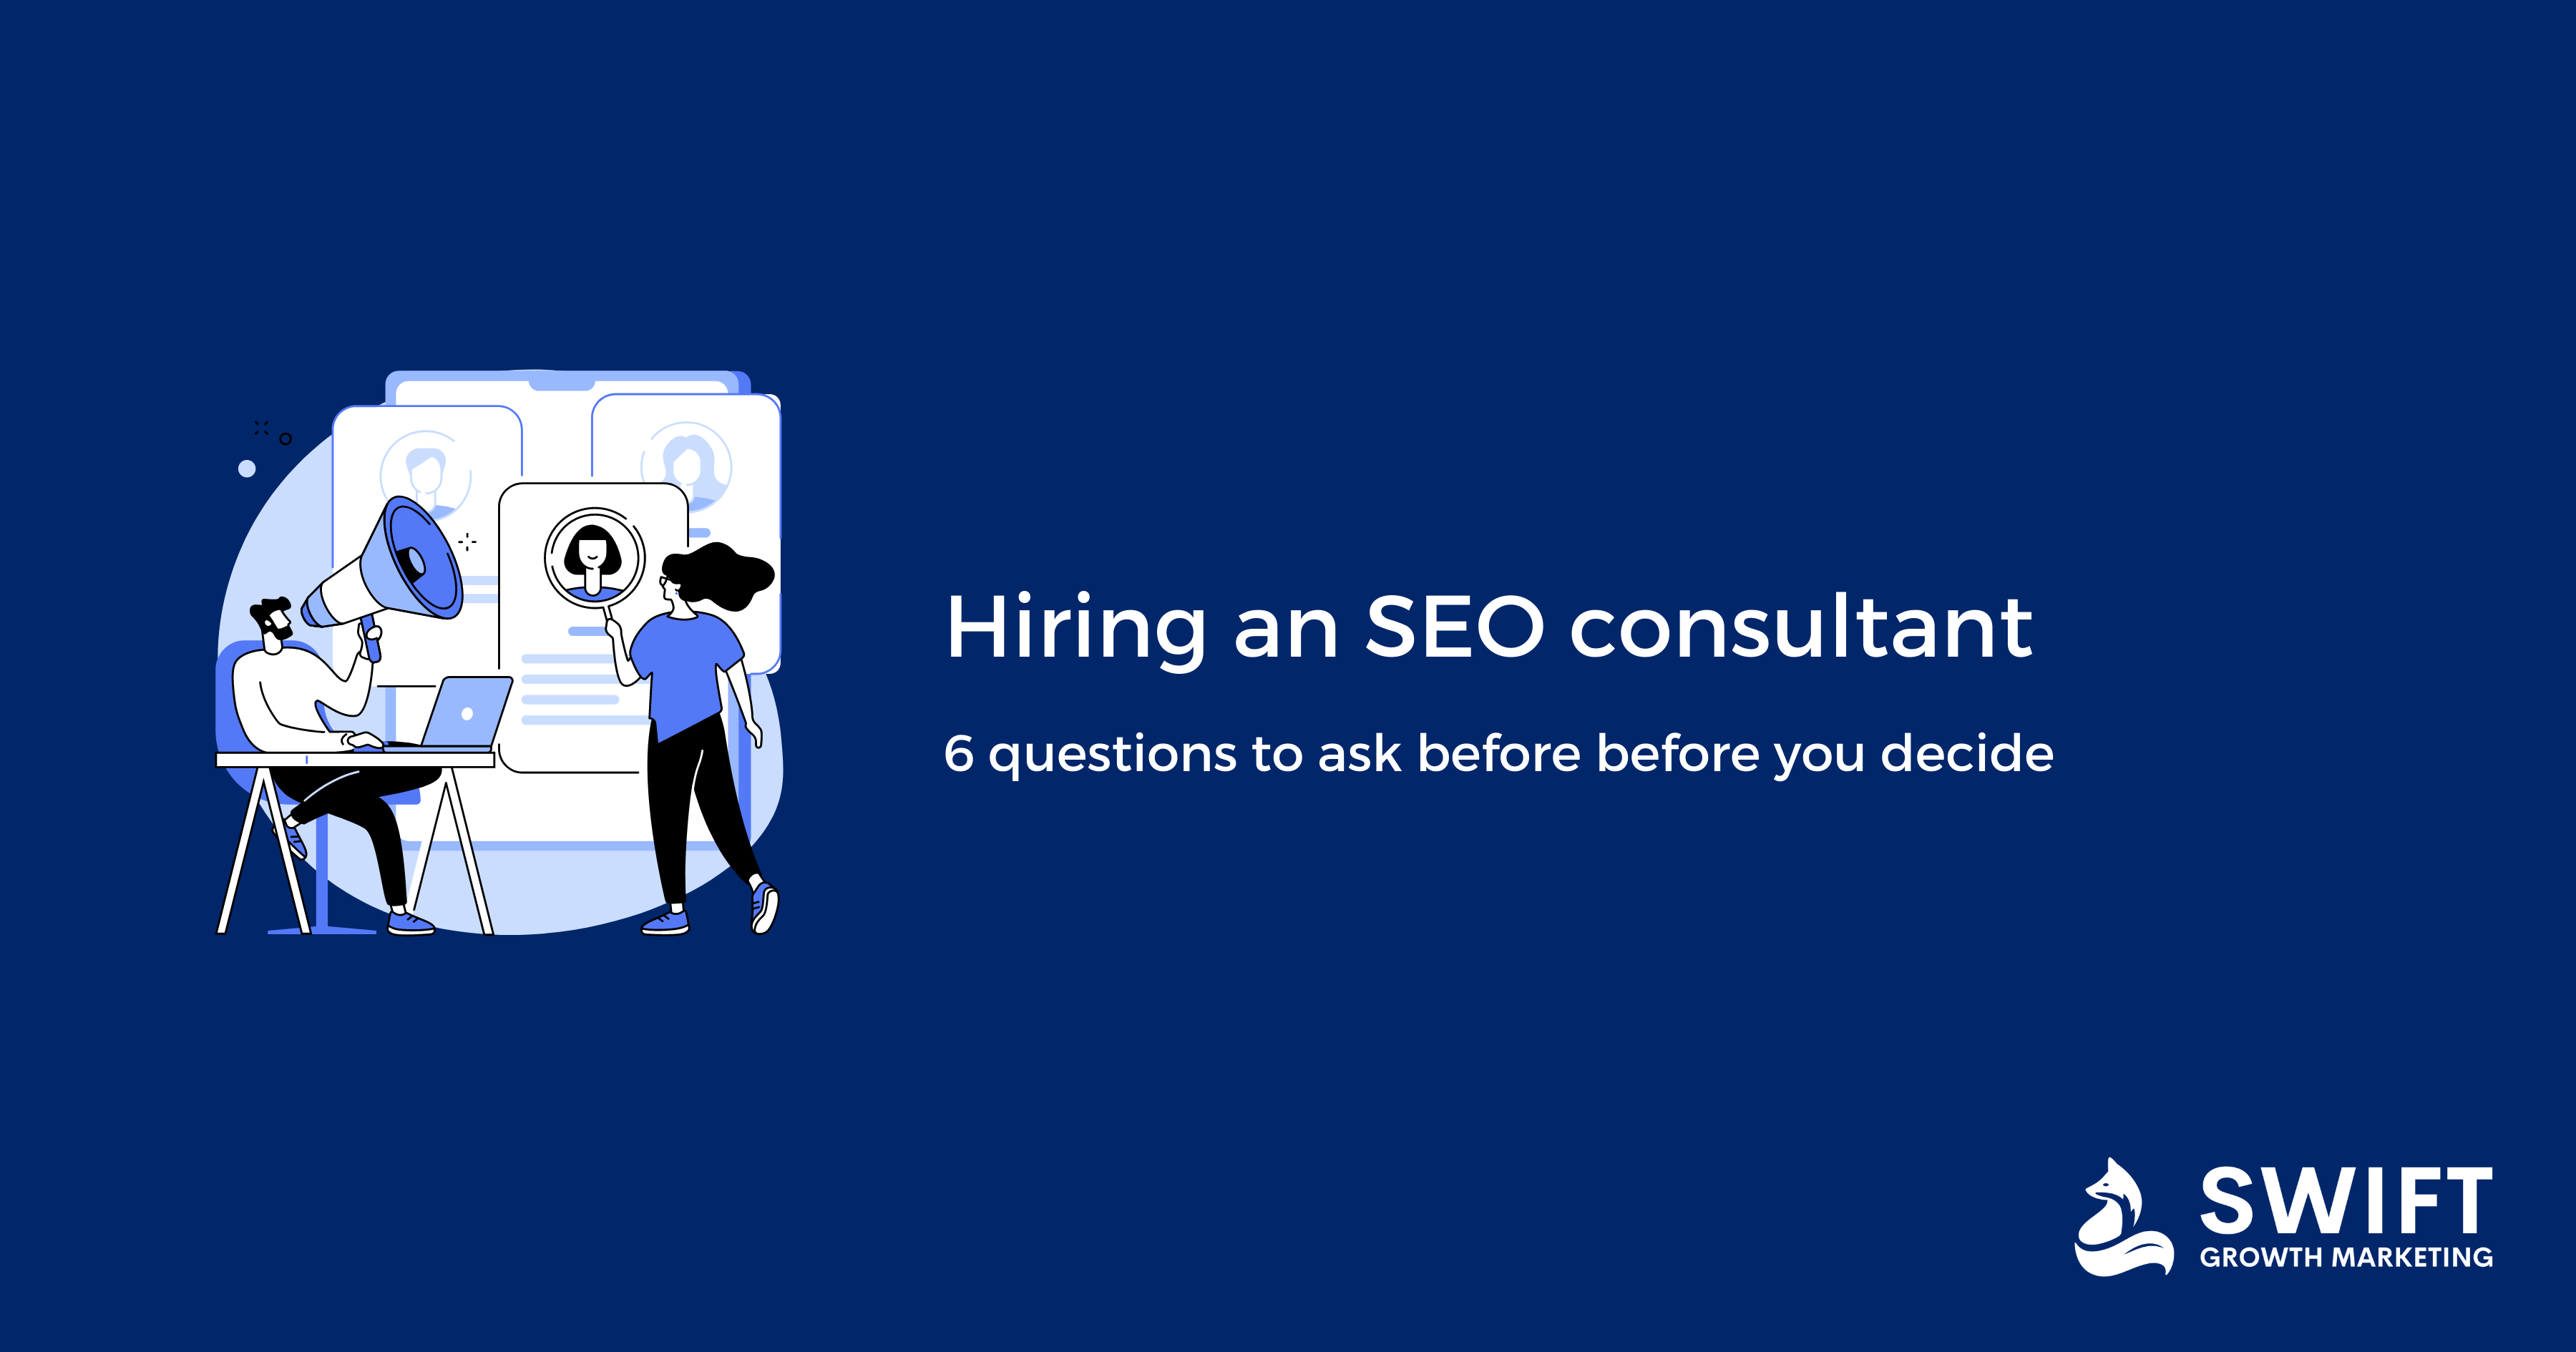 6 Questions to Ask Before Hiring an SEO Consultant